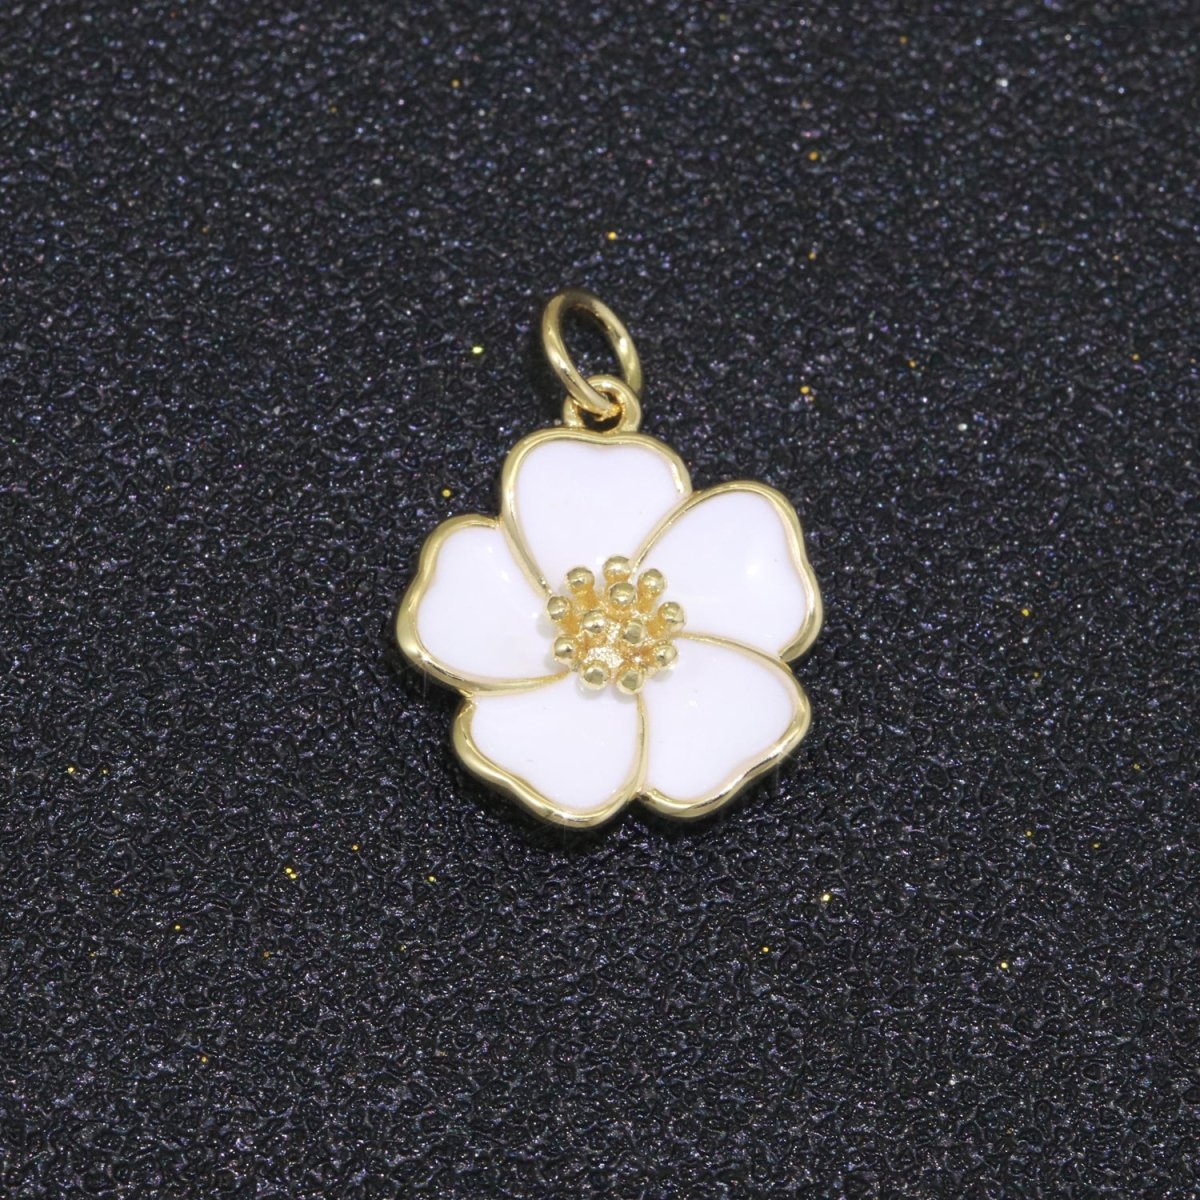 Dainty Hibiscus Charm Tropical Flower Gold Filled Enamel Charm Hawaiian Inspired Jewelry Pendant for Necklace Bracelet Earring Component M-499 - M-507 - DLUXCA